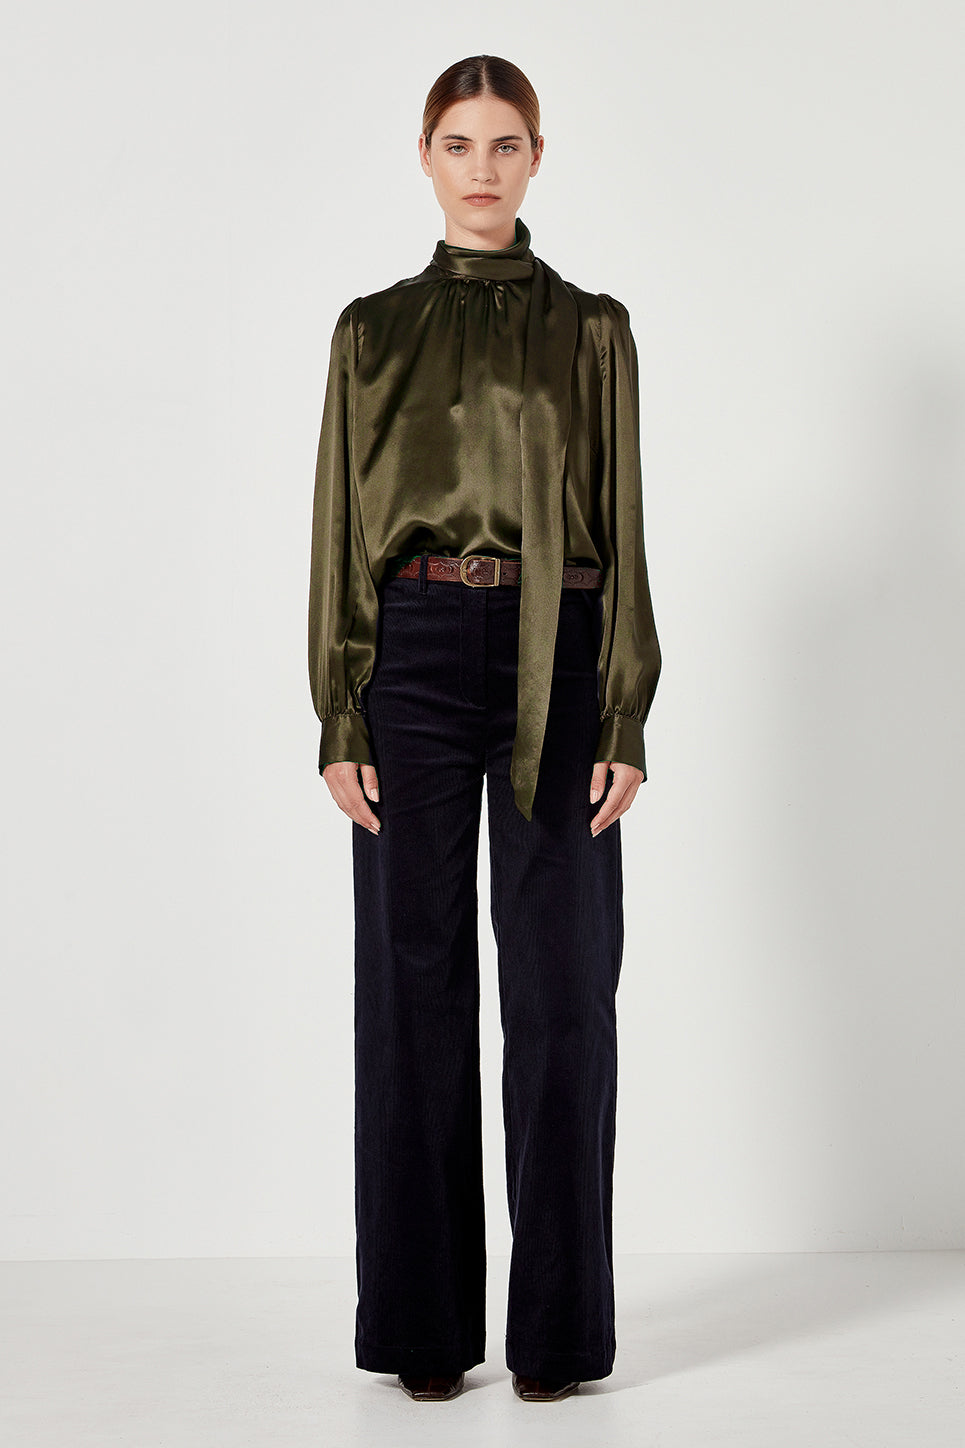 The Bowie Blouse in Khaki